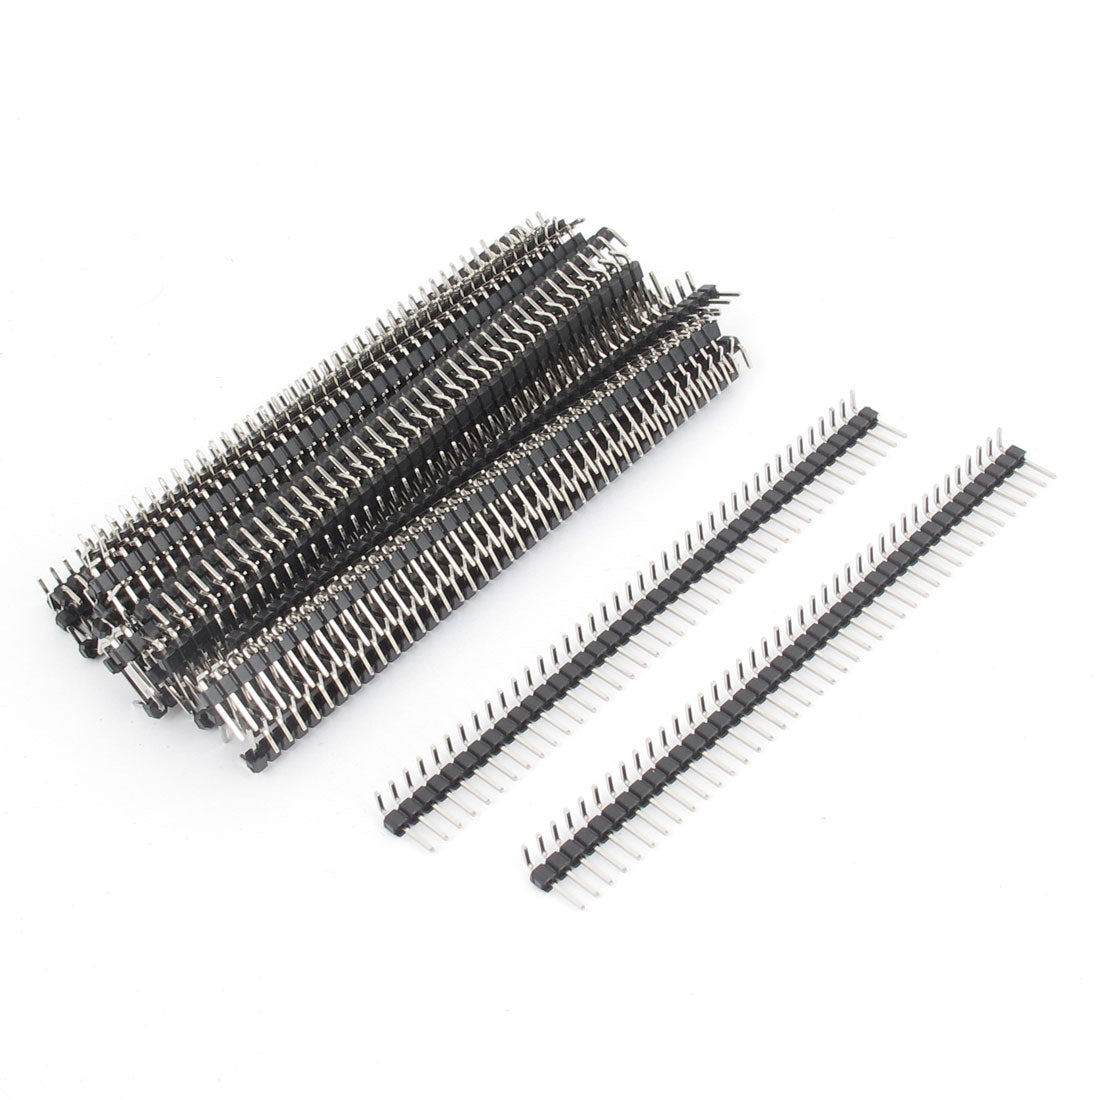 uxcell Uxcell 30pcs Right Angle 40-pin 2.54mm Male Pin Header for Breadboard 1x40 Single Row